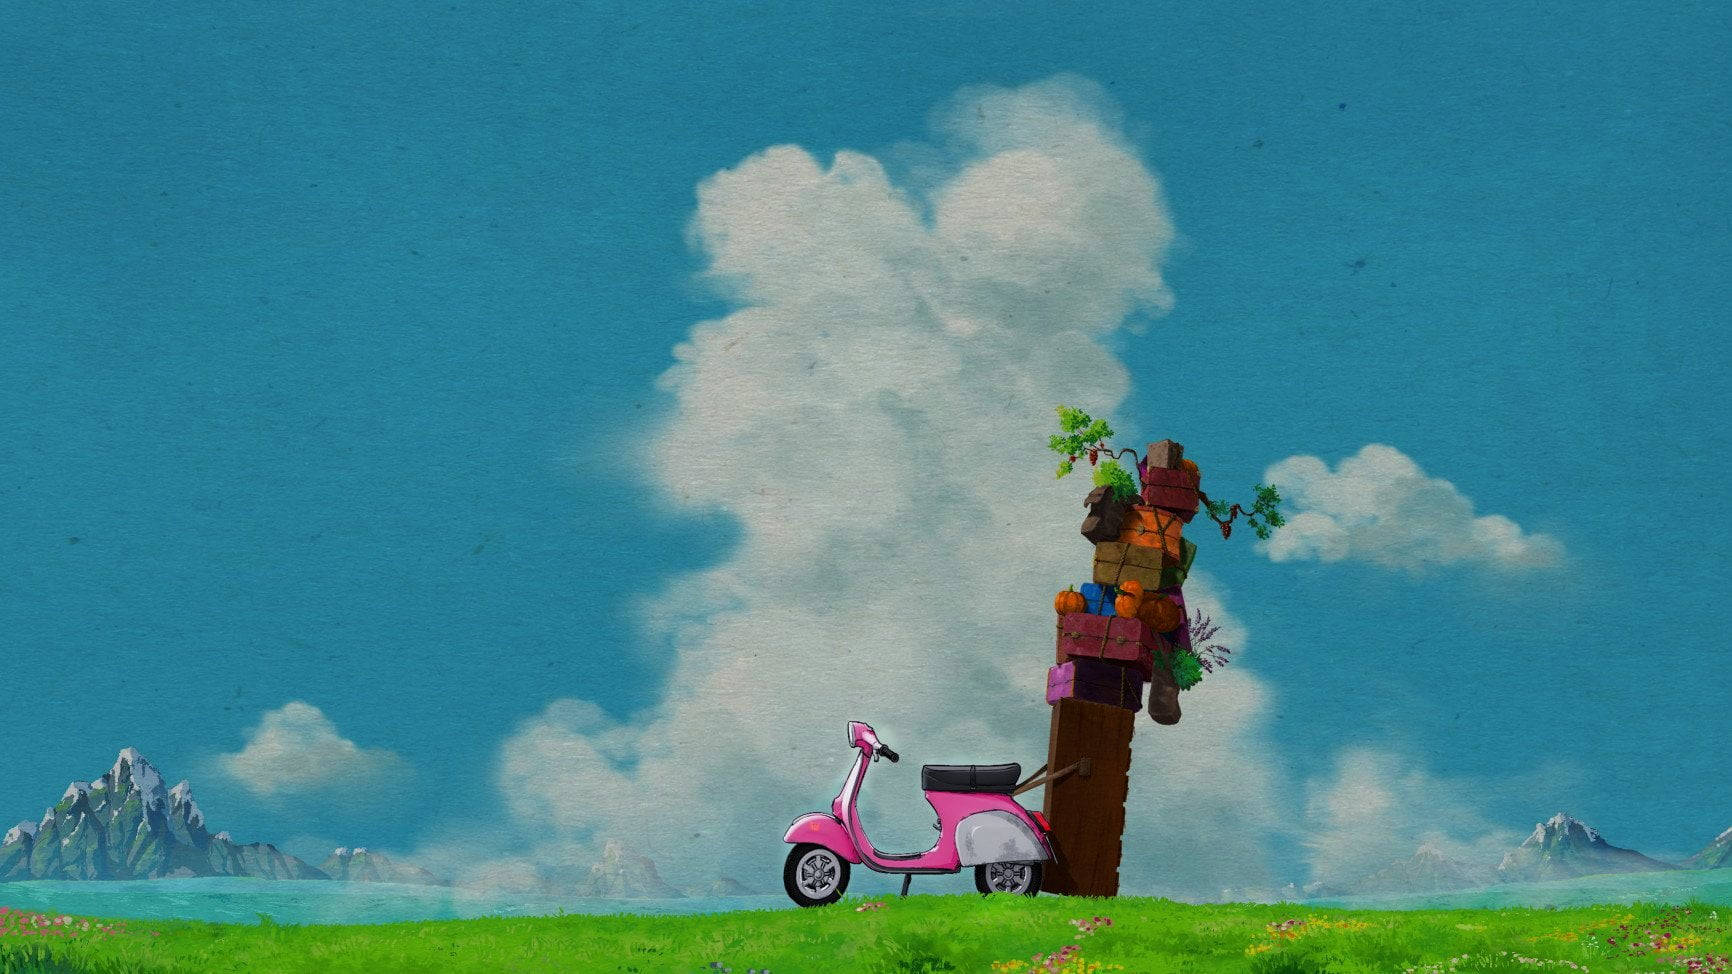 Studio Ghibli Scenery With Pink Scooter Background